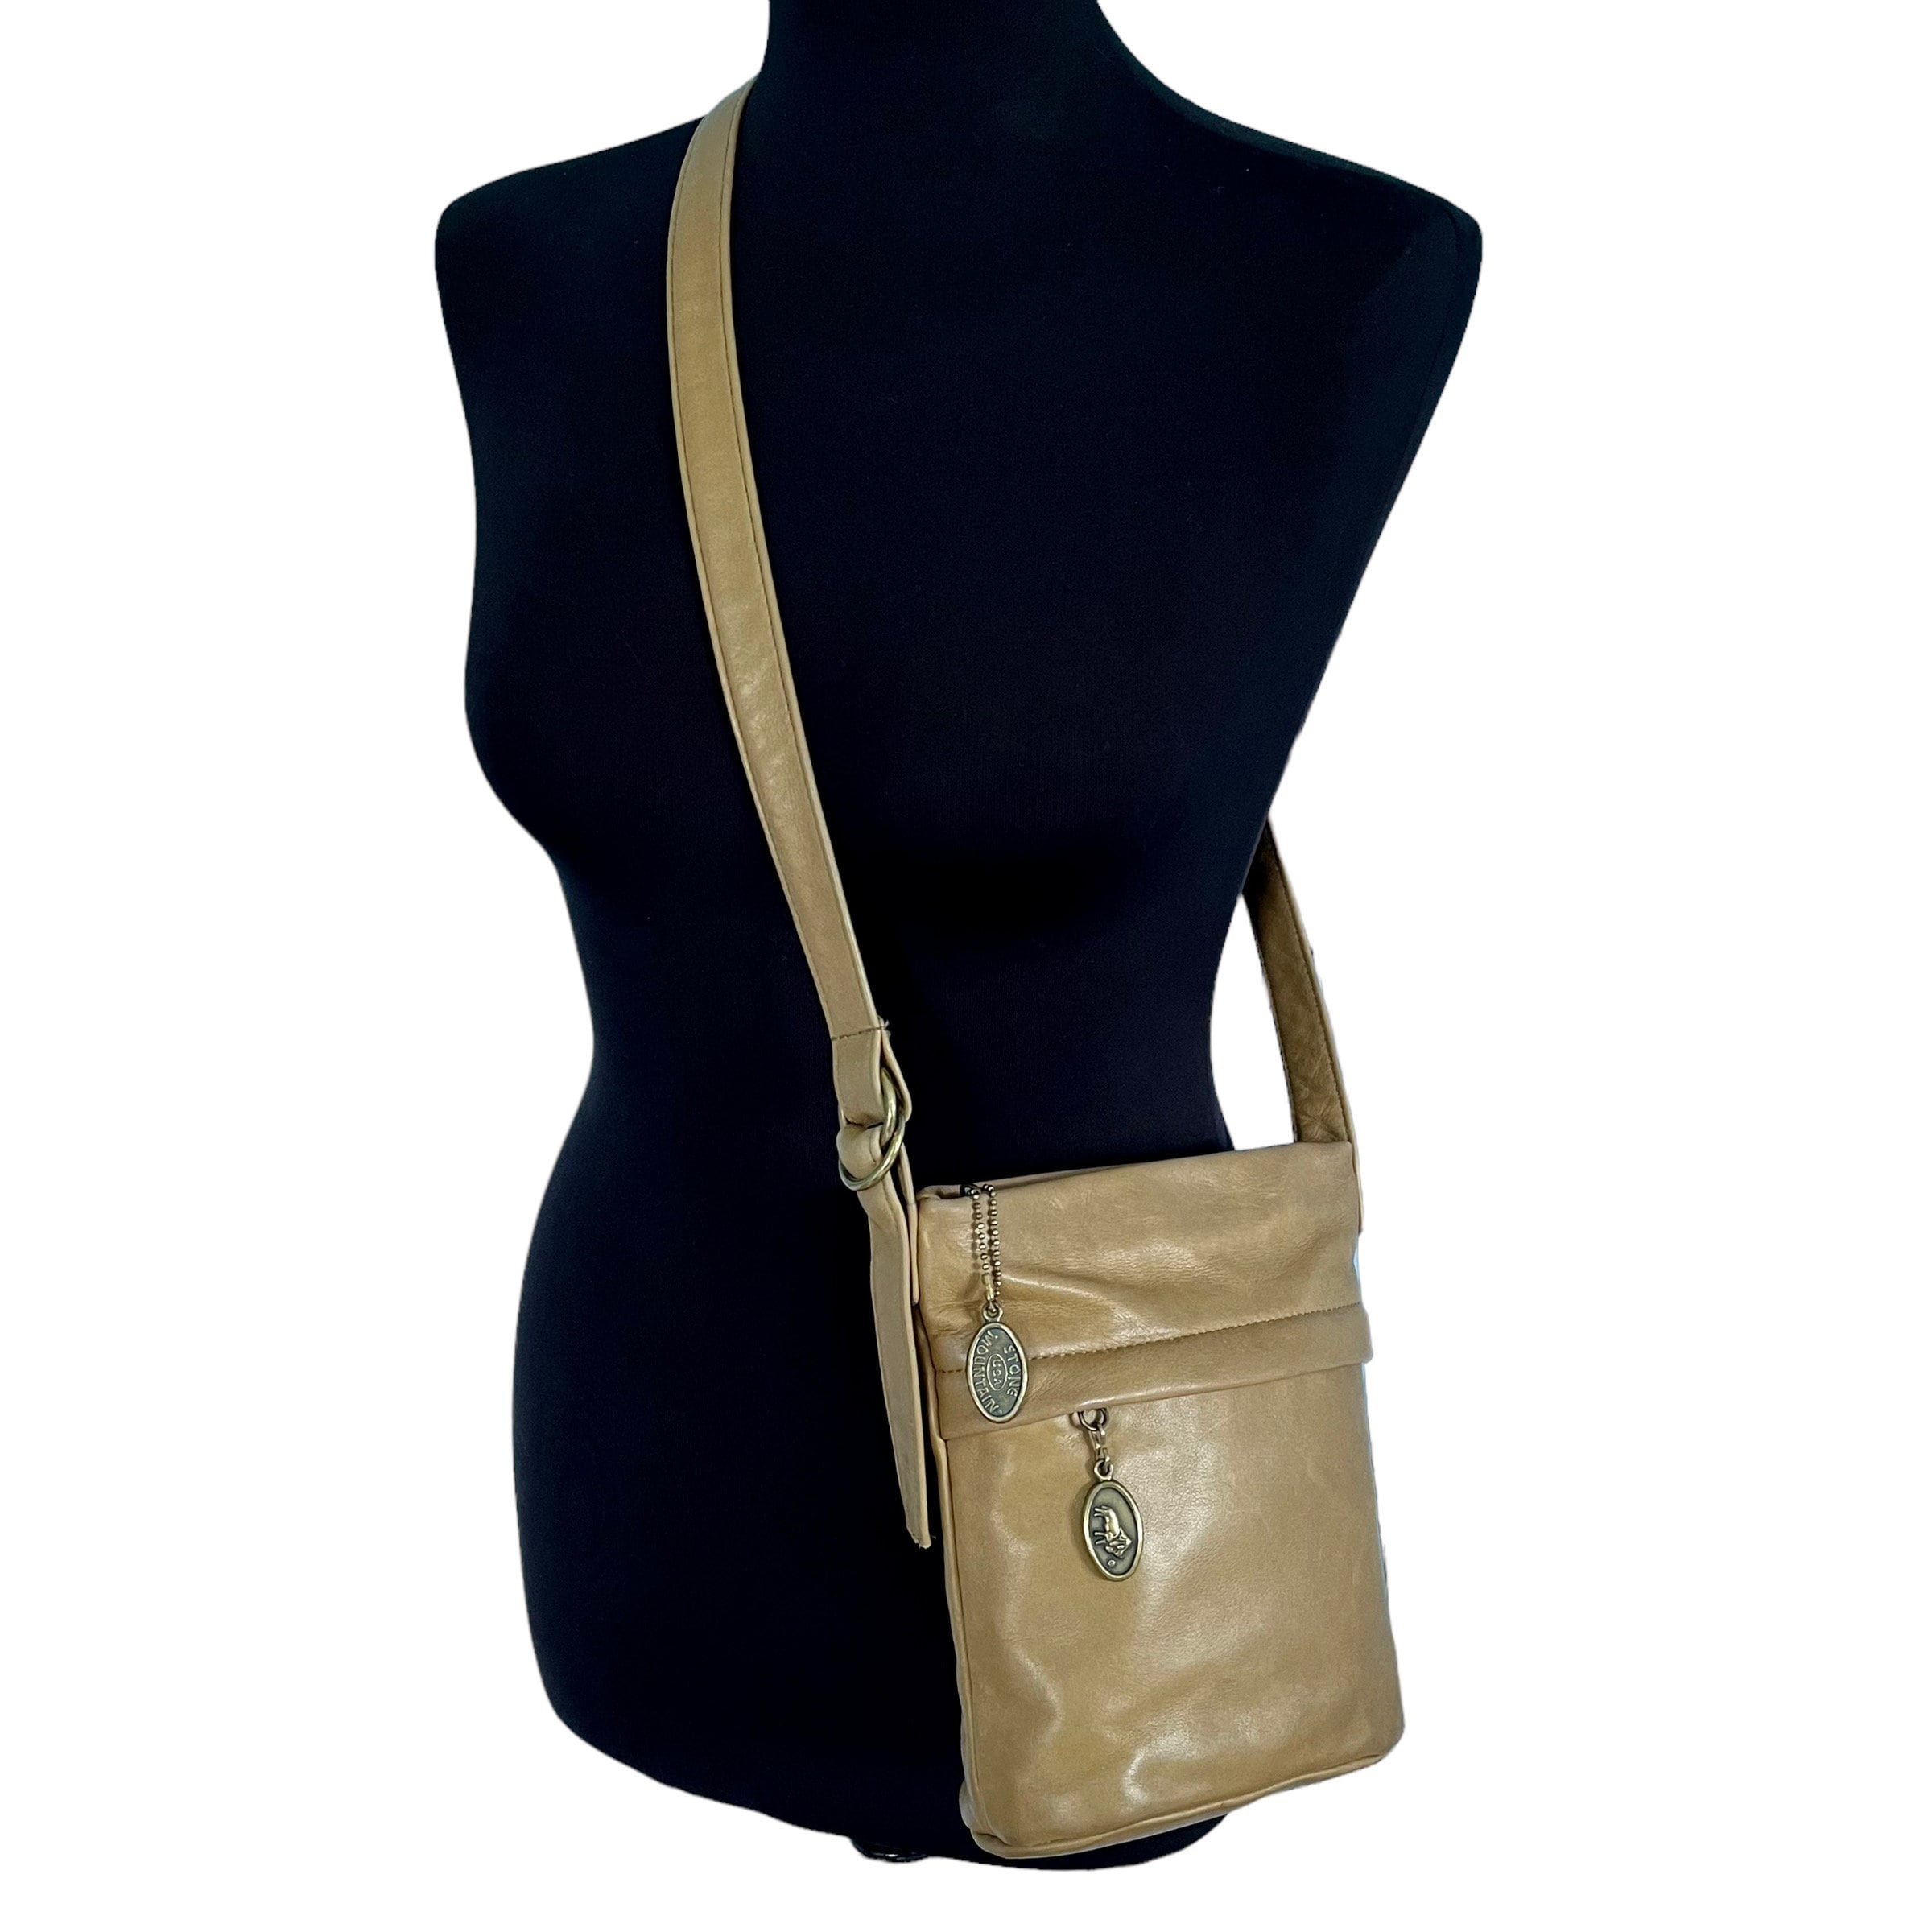 Stone Mountain green leather bag - clothing & accessories - by